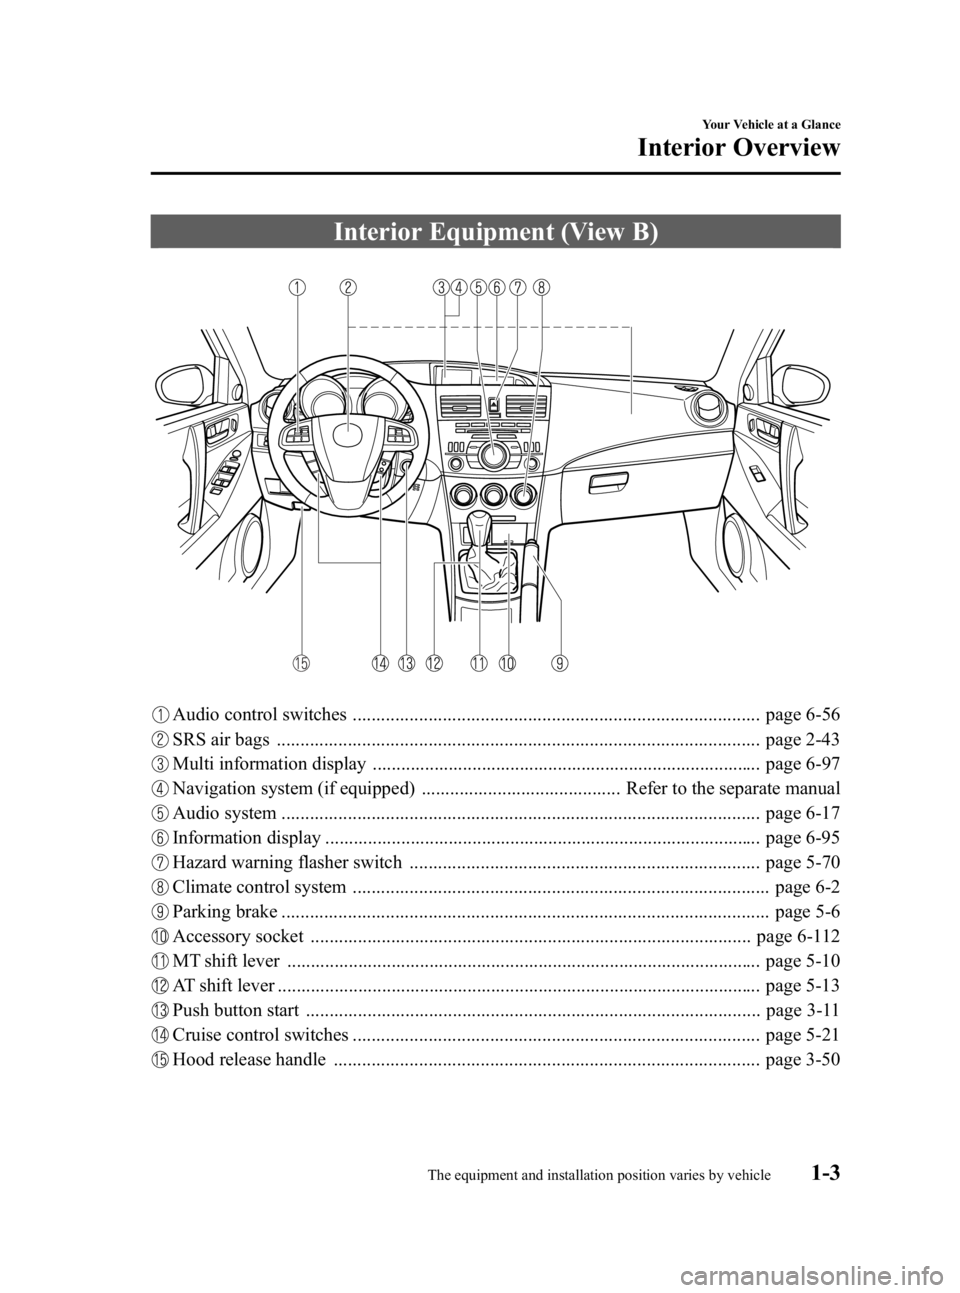 MAZDA MODEL 3 5-DOOR 2010  Owners Manual Black plate (9,1)
Interior Equipment (View B)
Audio control switches ...................................................................................... page 6-56
SRS air bags .....................